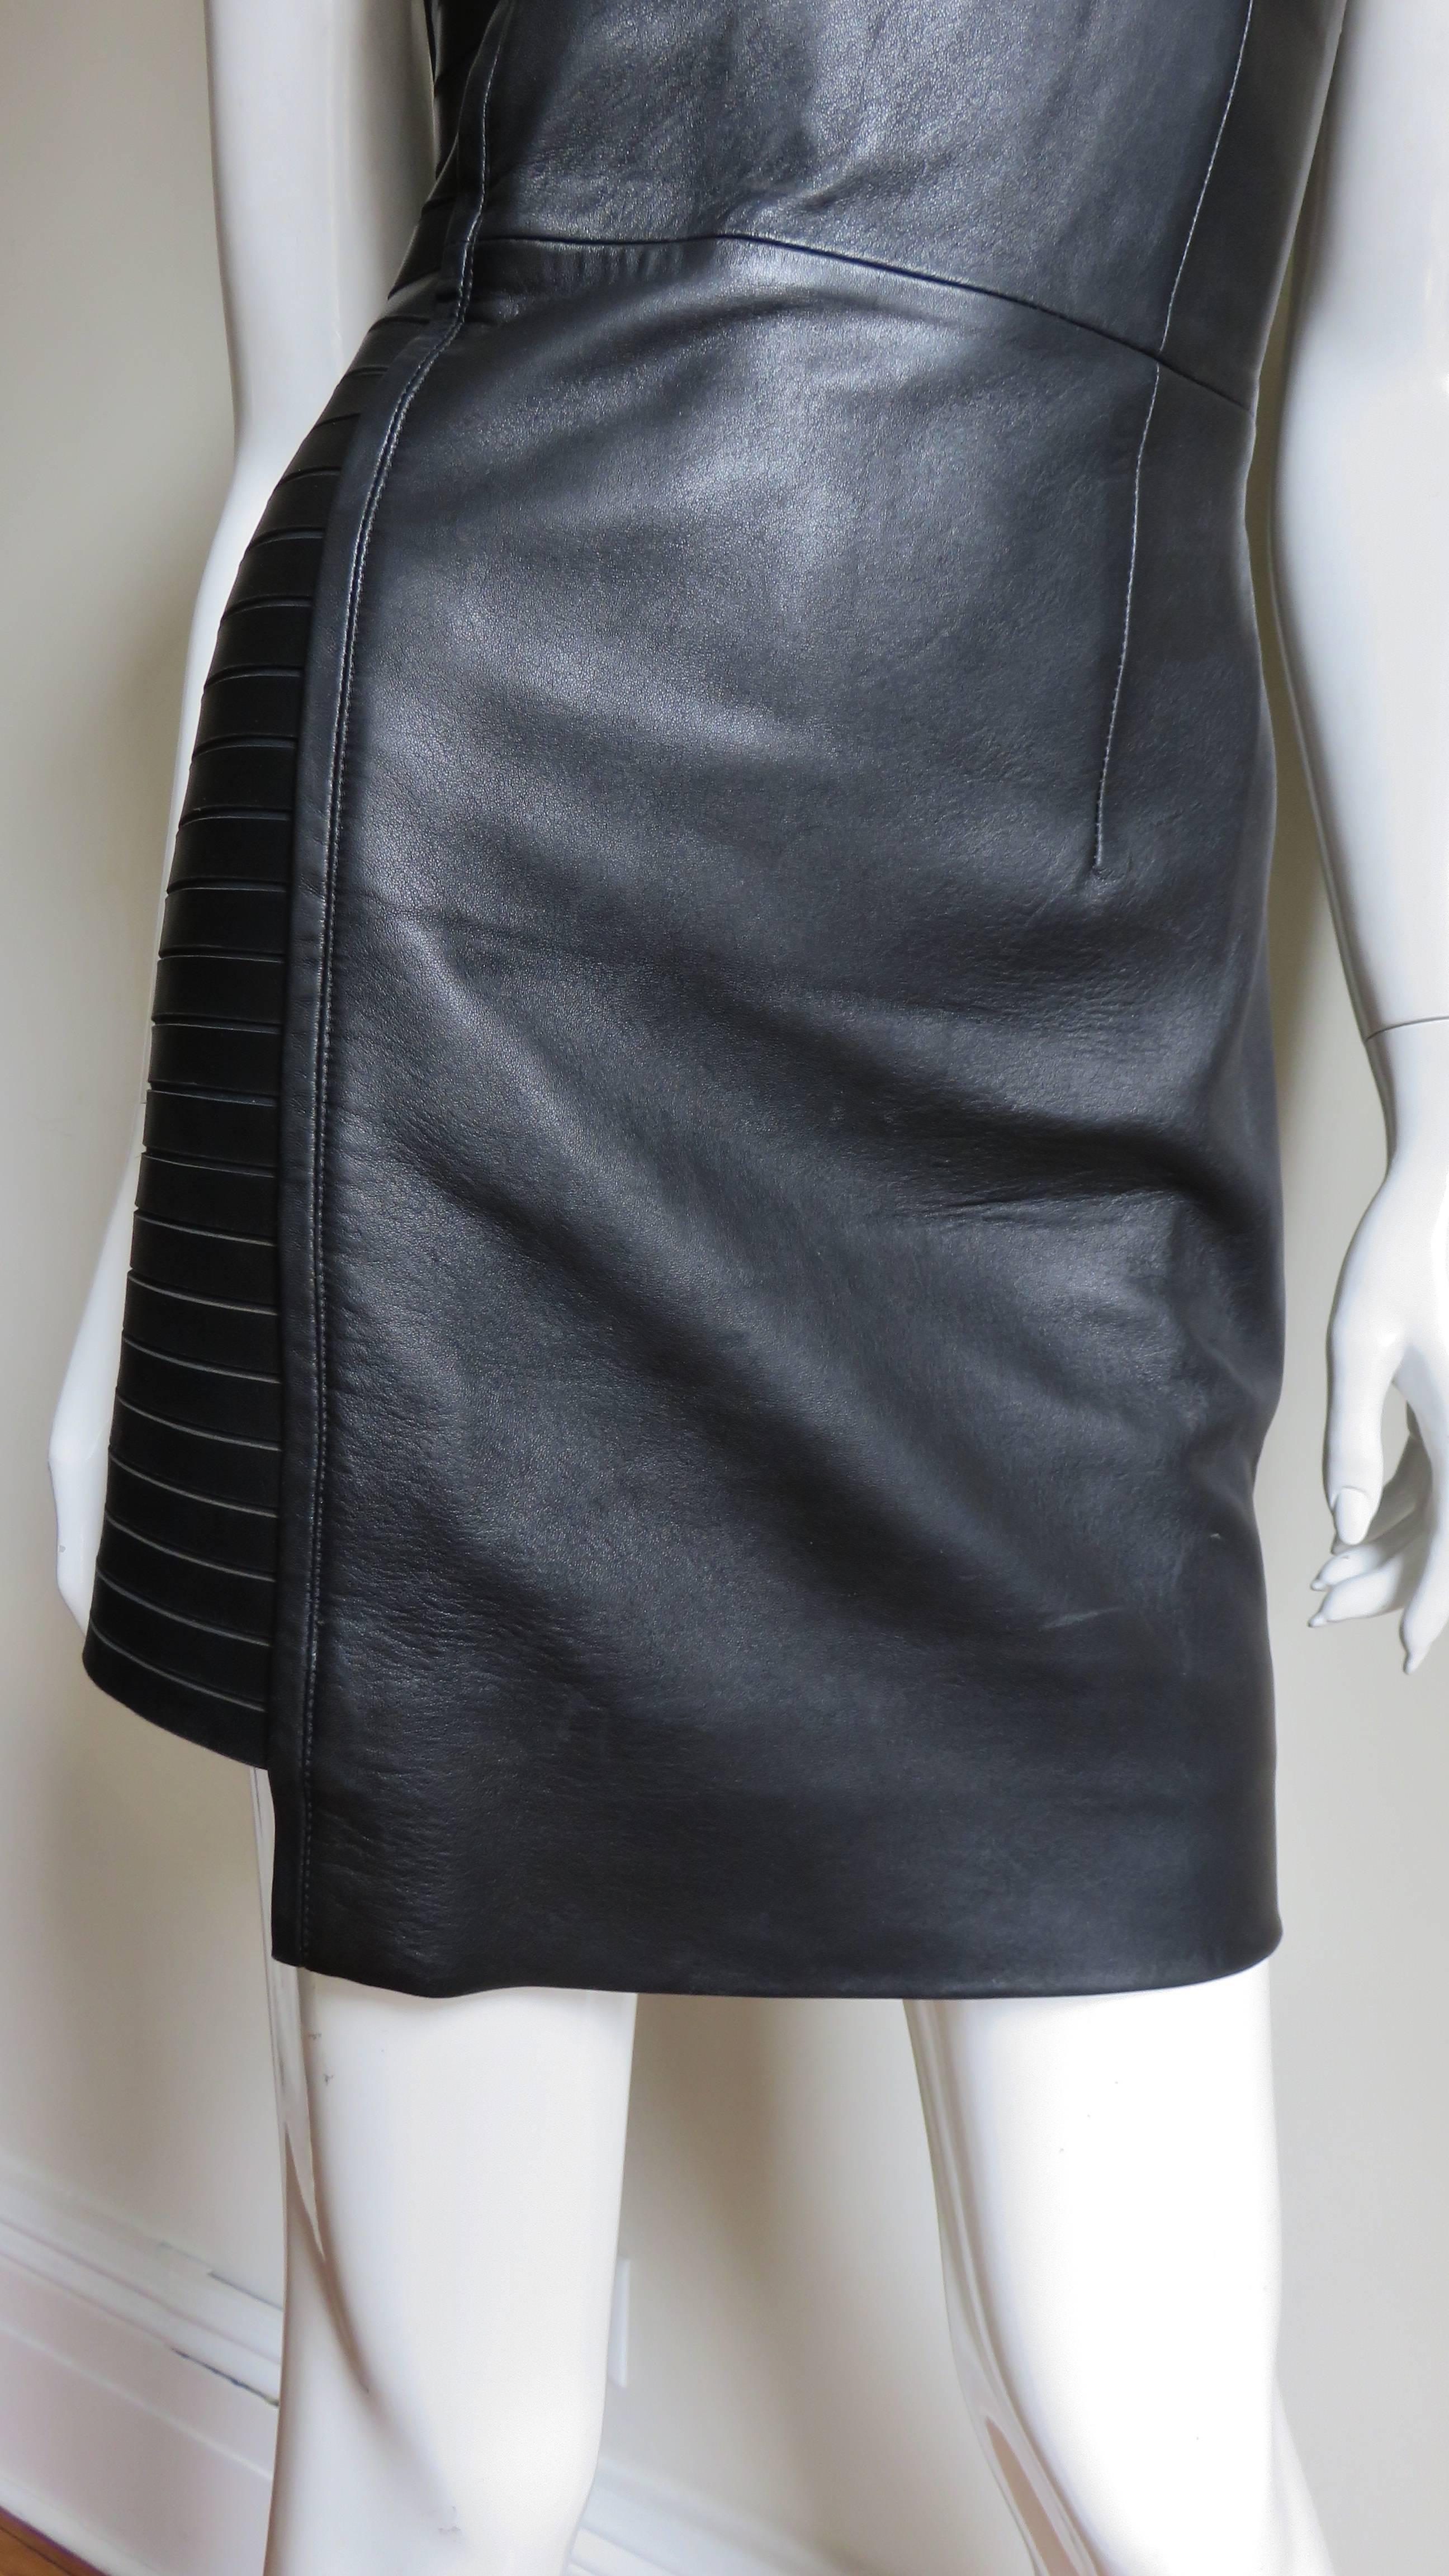 Versace Detailed Leather Dress In Good Condition For Sale In Water Mill, NY